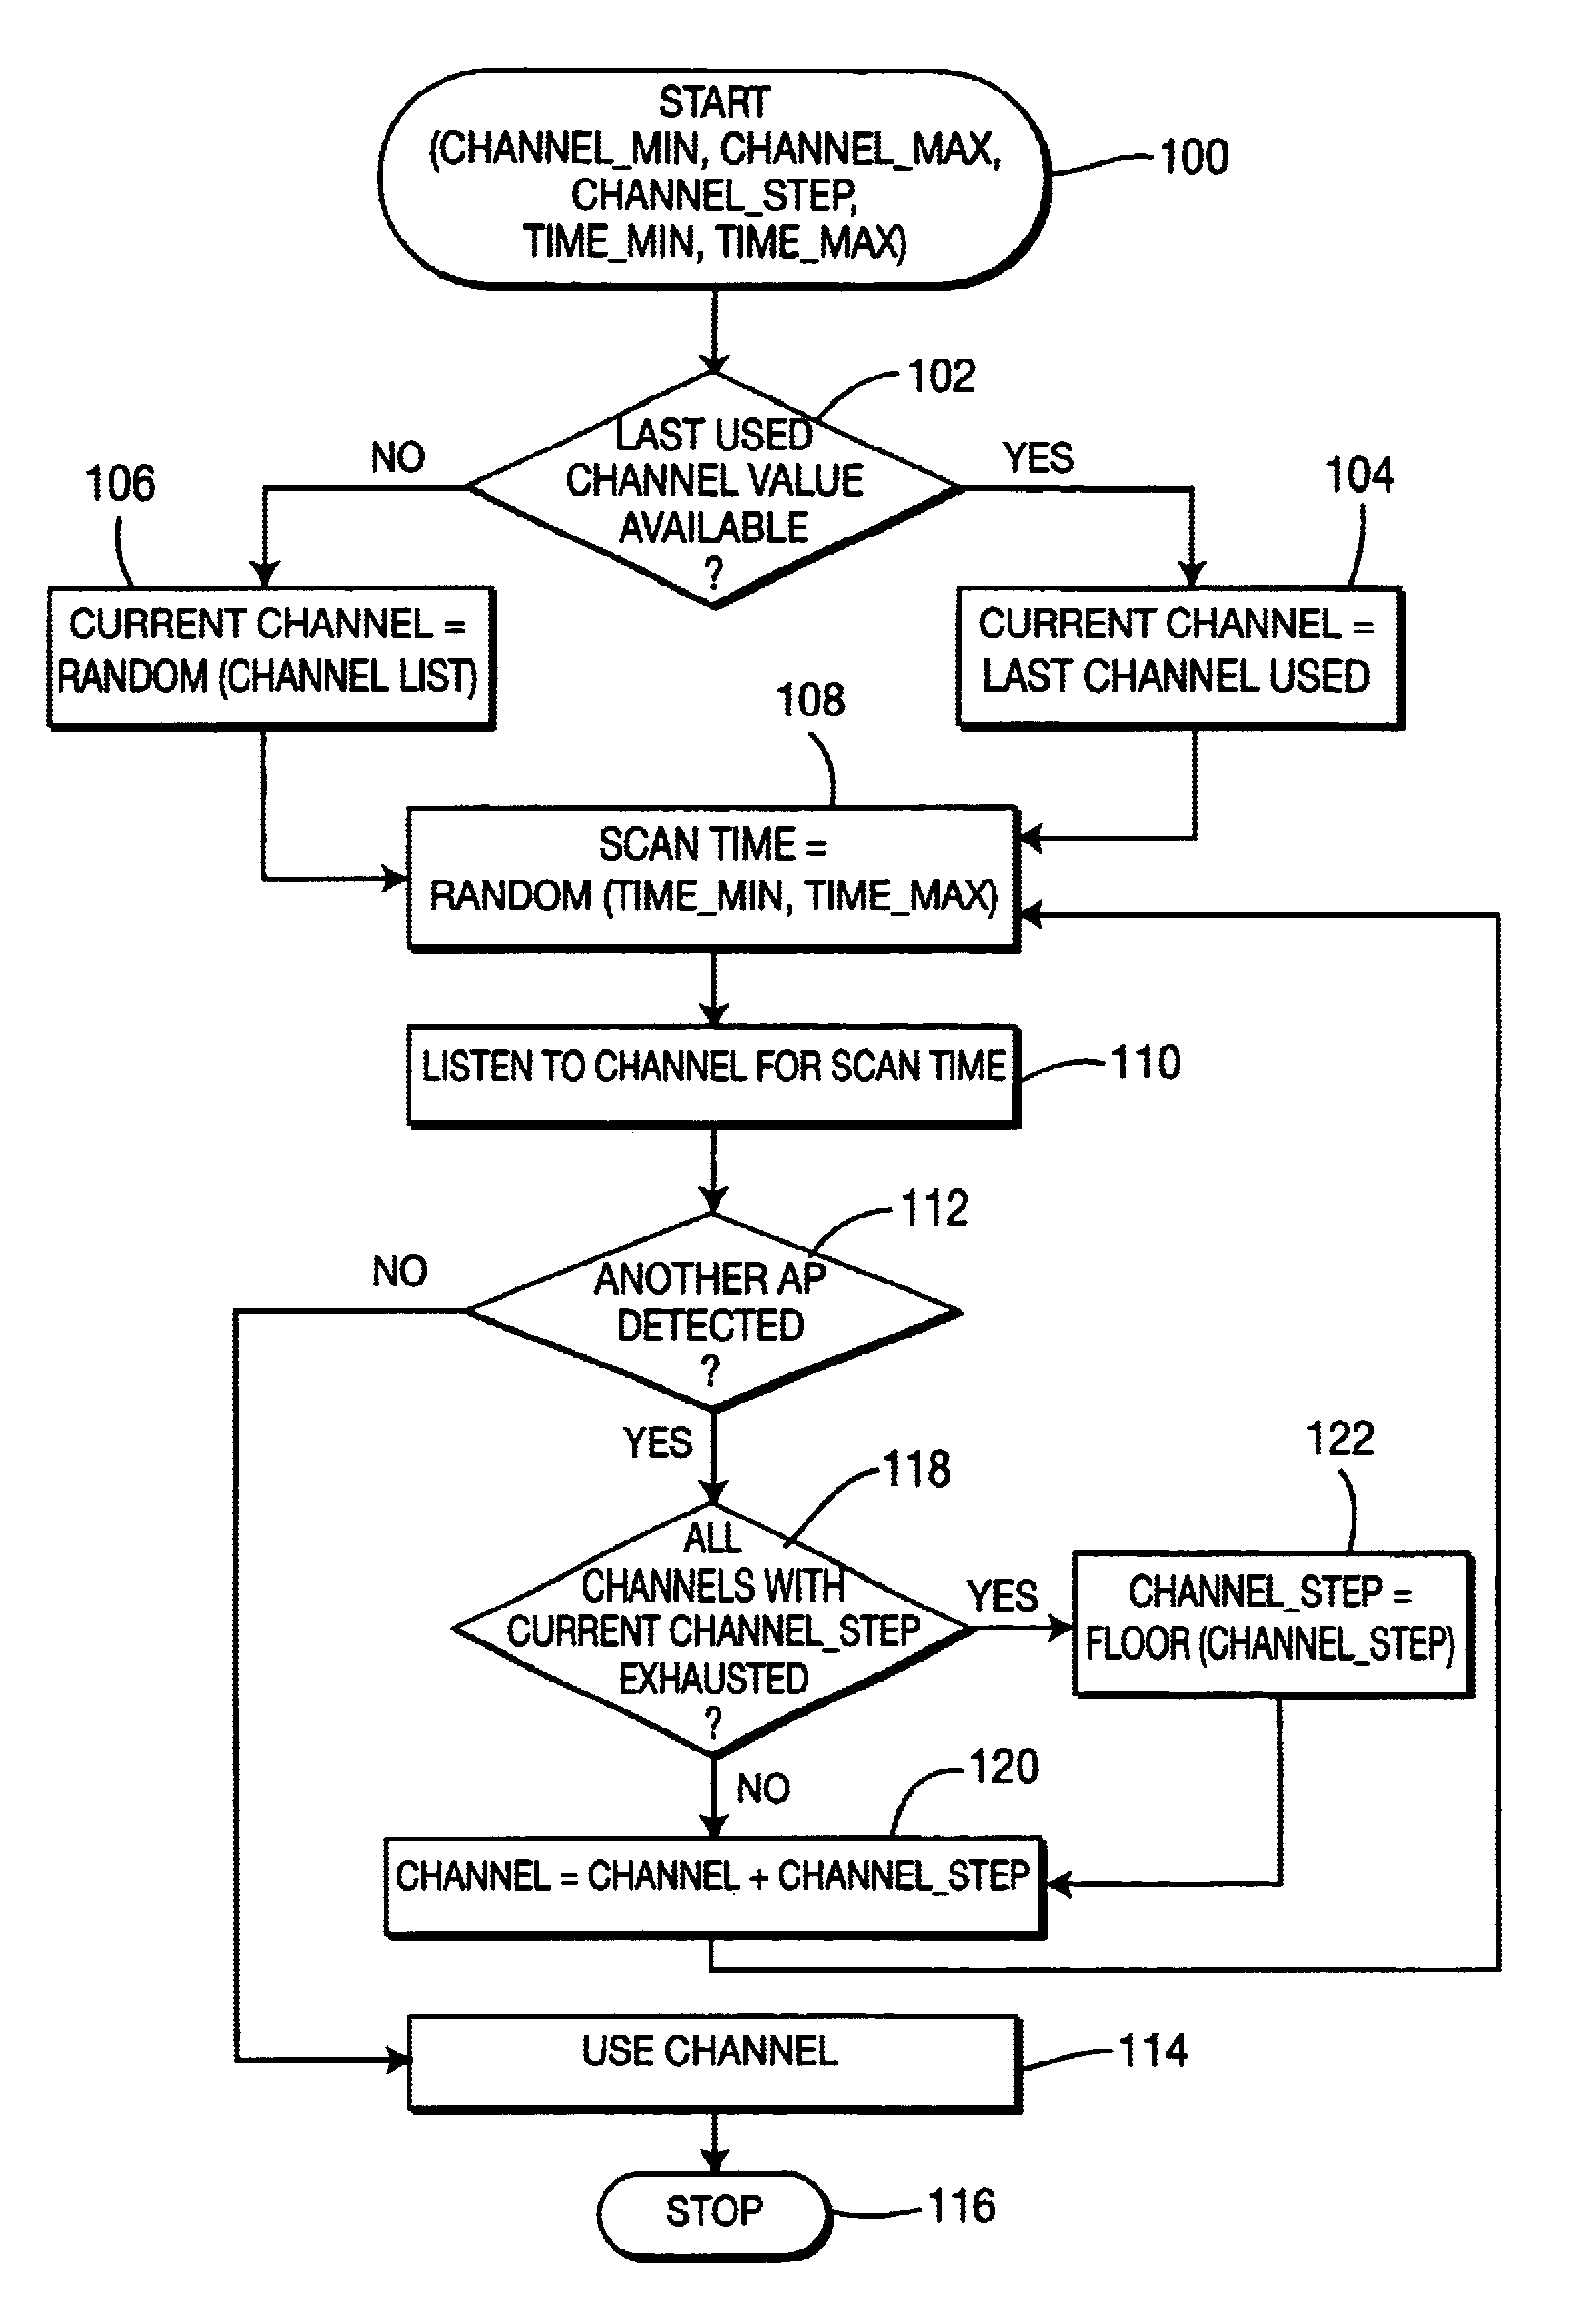 Automatic channel selection in a radio access network